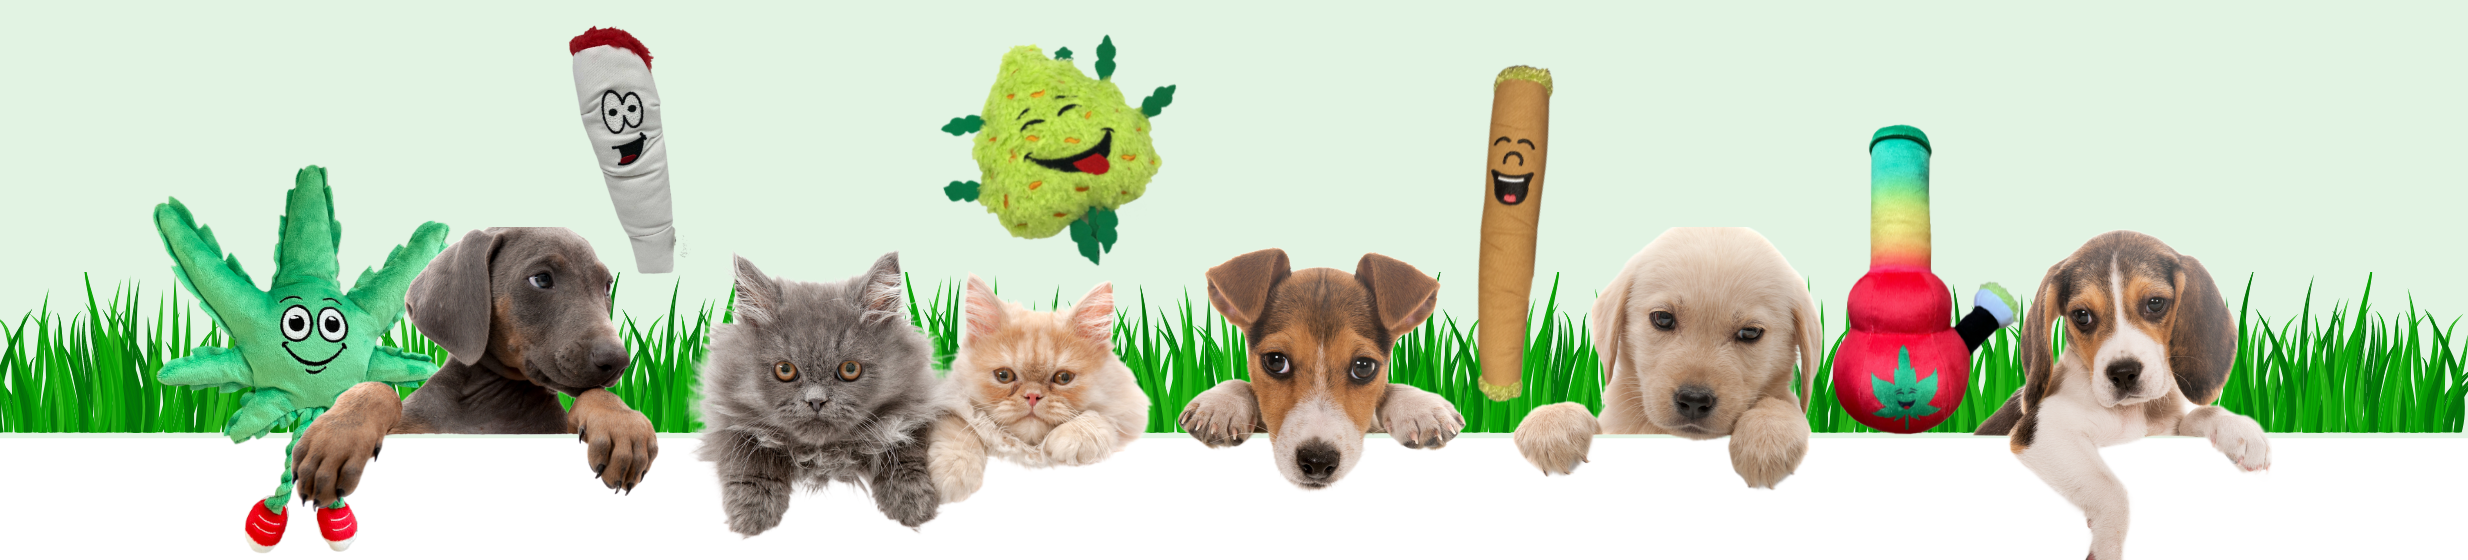 PAW:20 Weed Themed Pet Toys